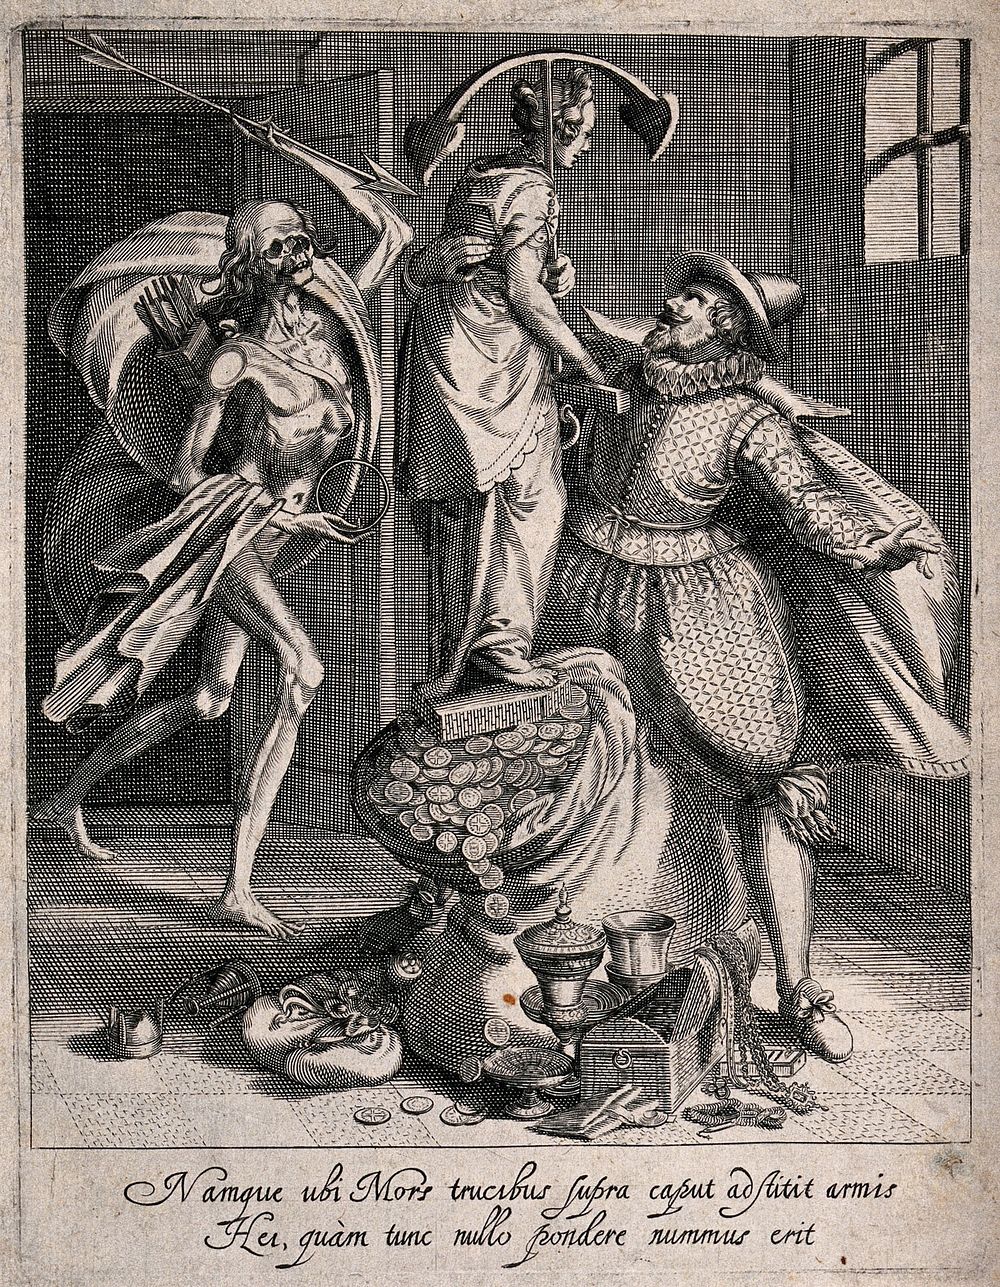 A man embraces a female figure holding an anchor who is standing on a sack filled with money while Death enters the room.…